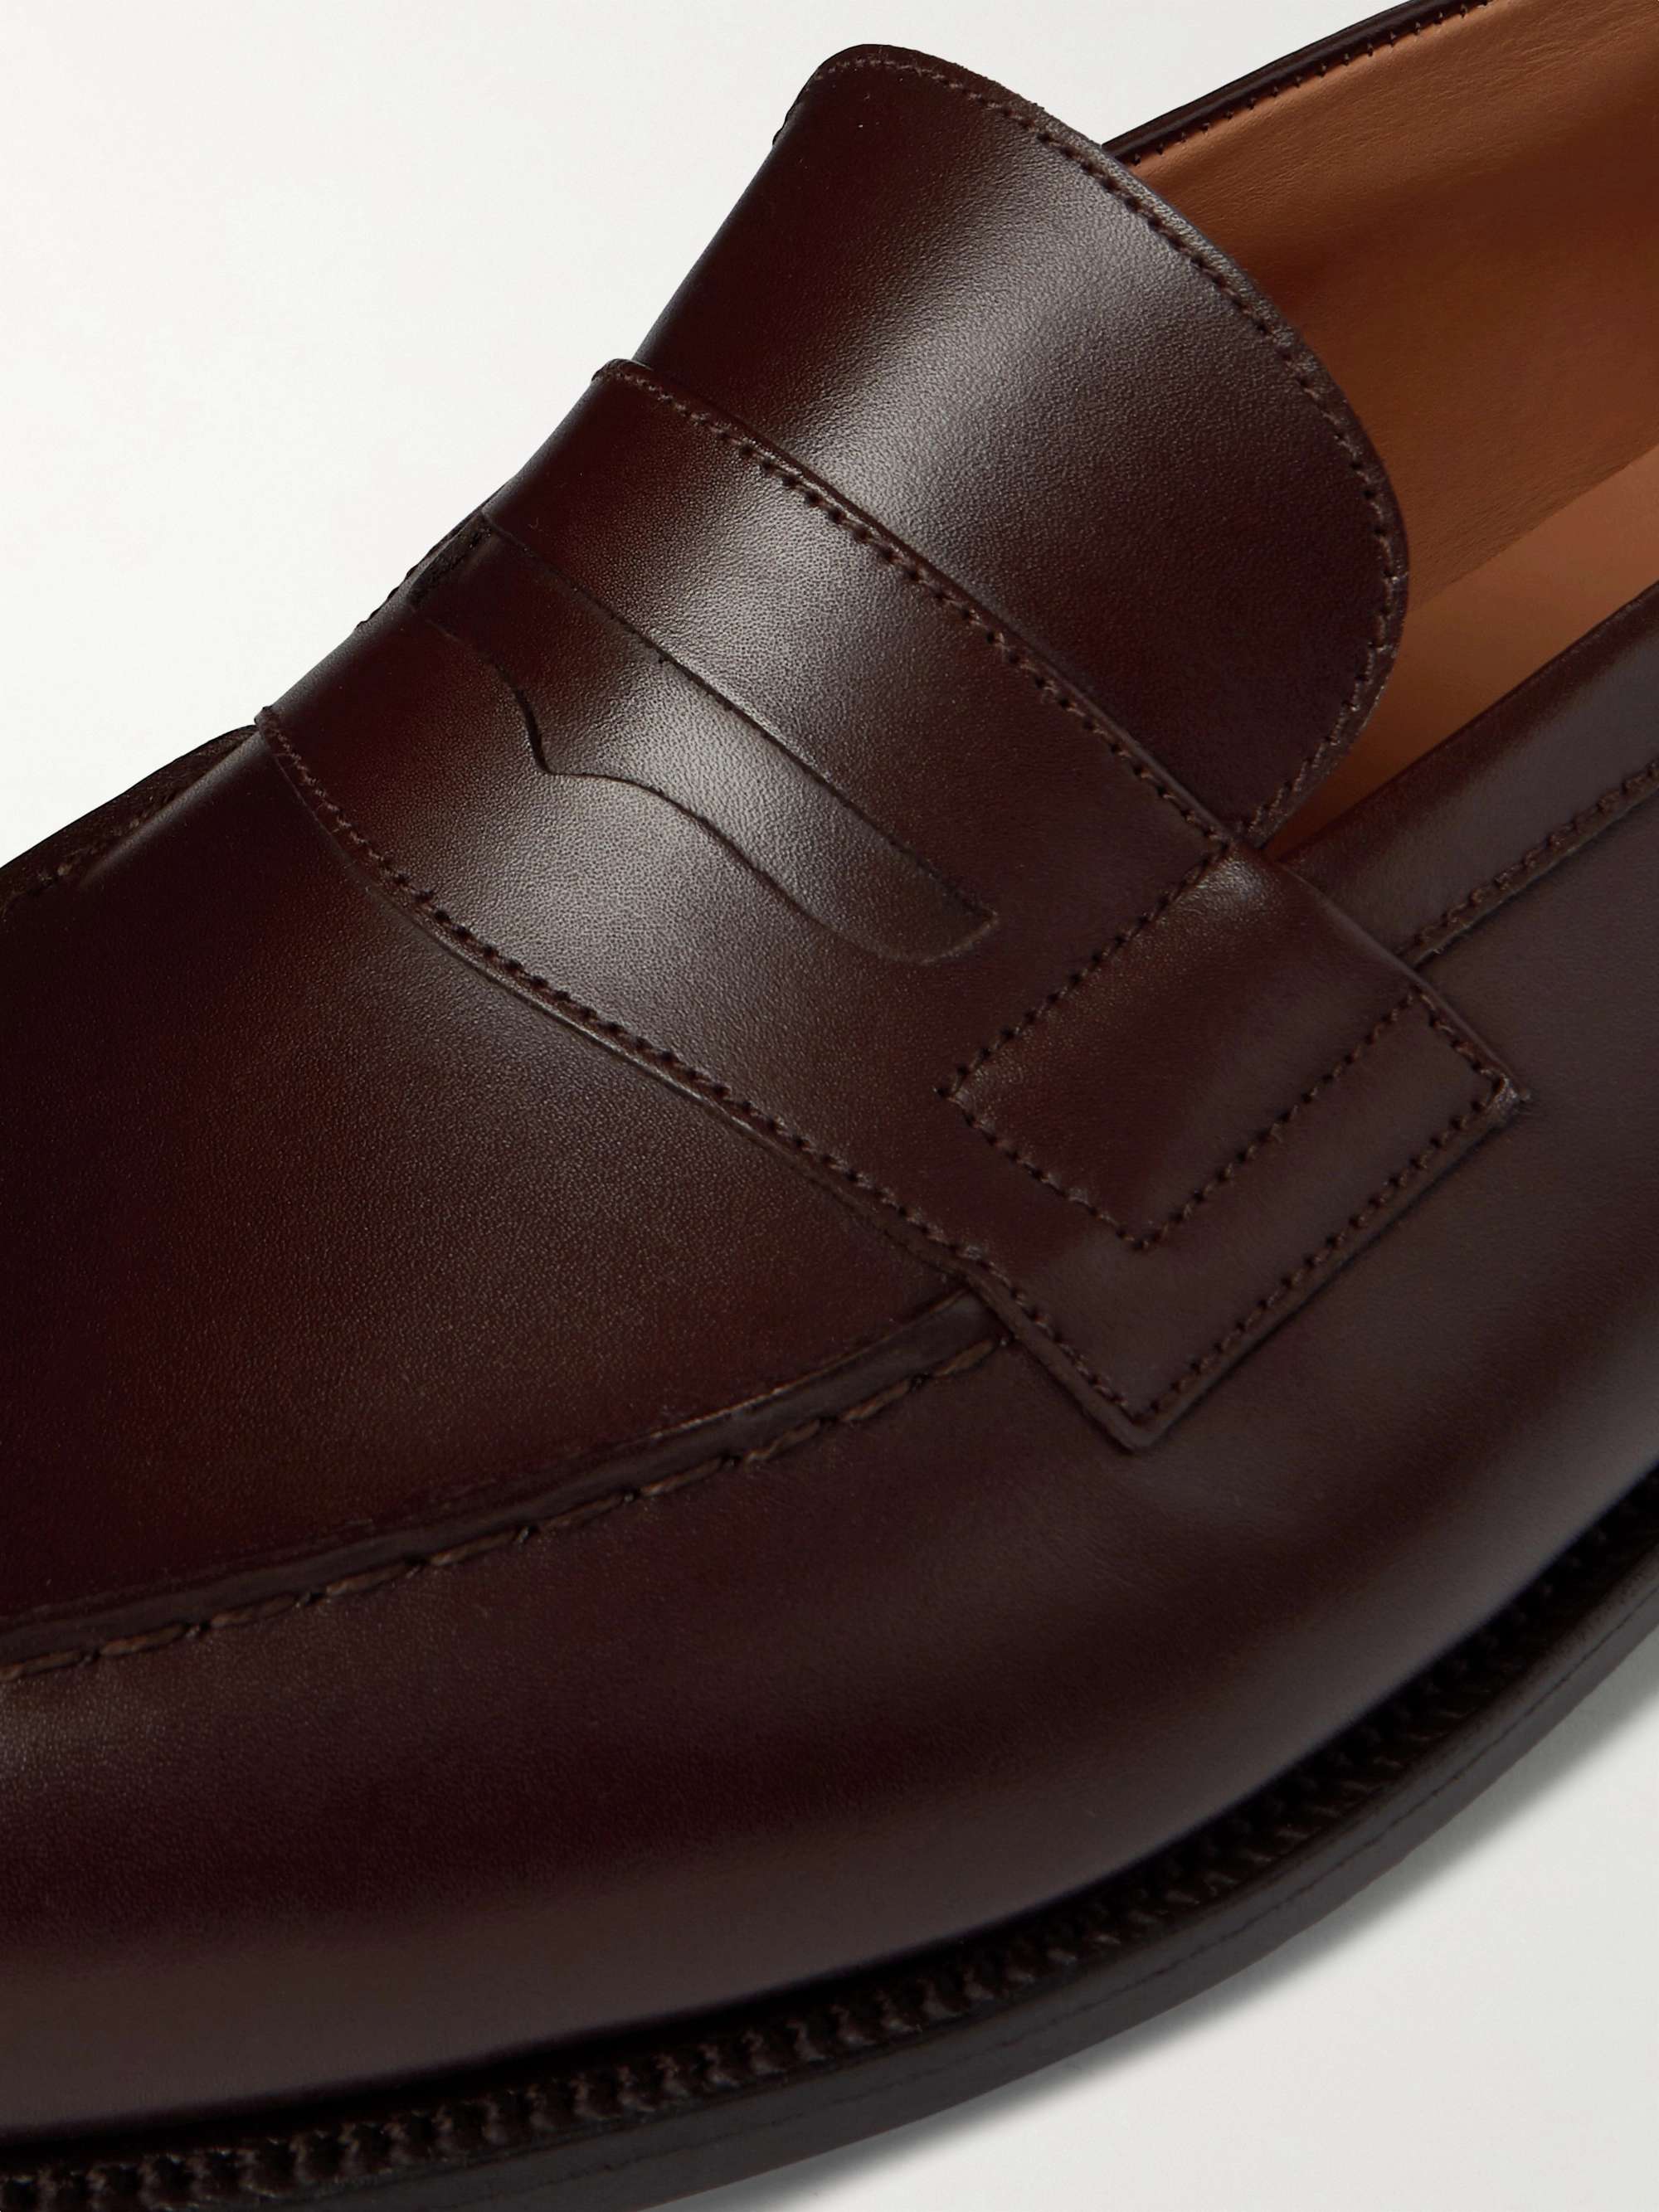 J.M. Weston 180 Moccasin Leather Loafers